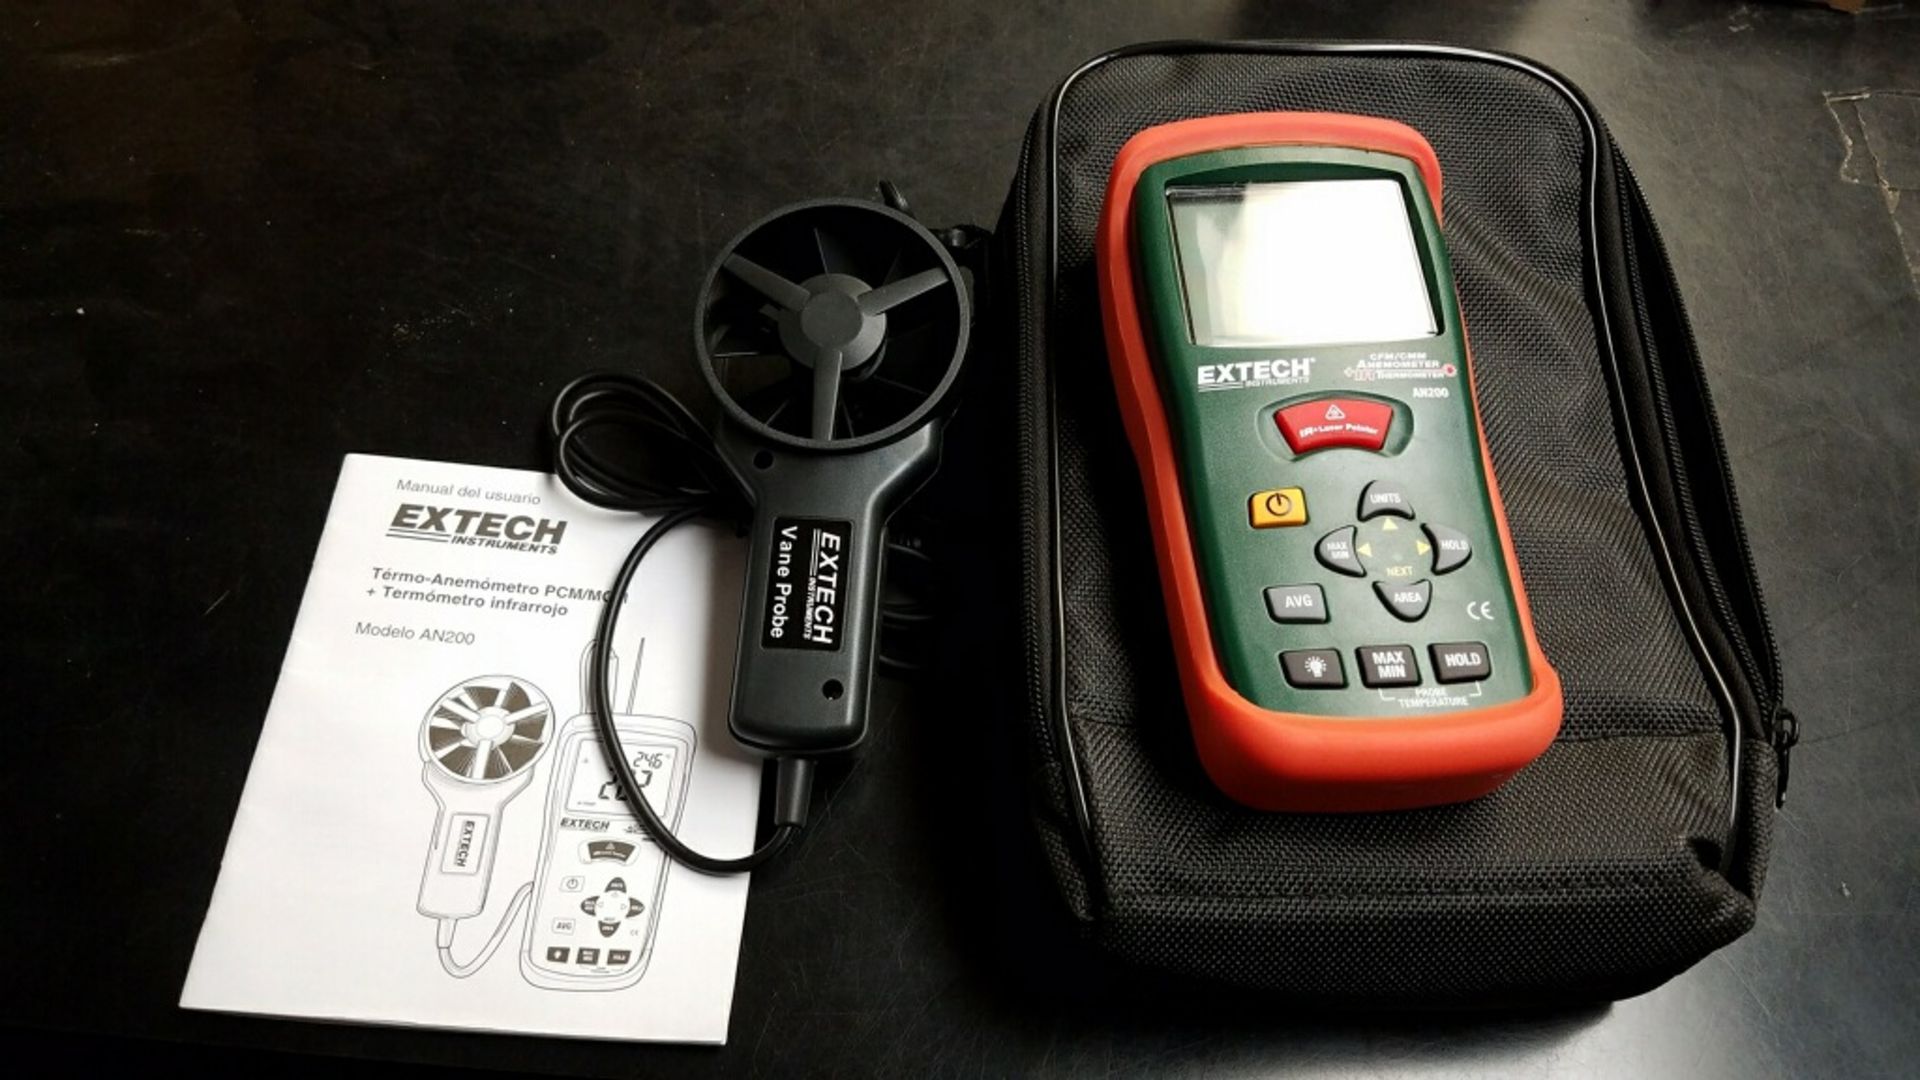 THERMO ANEMOMETER EXTECH MDL. AN200 CFM/CMM, with Infrared Thermometer